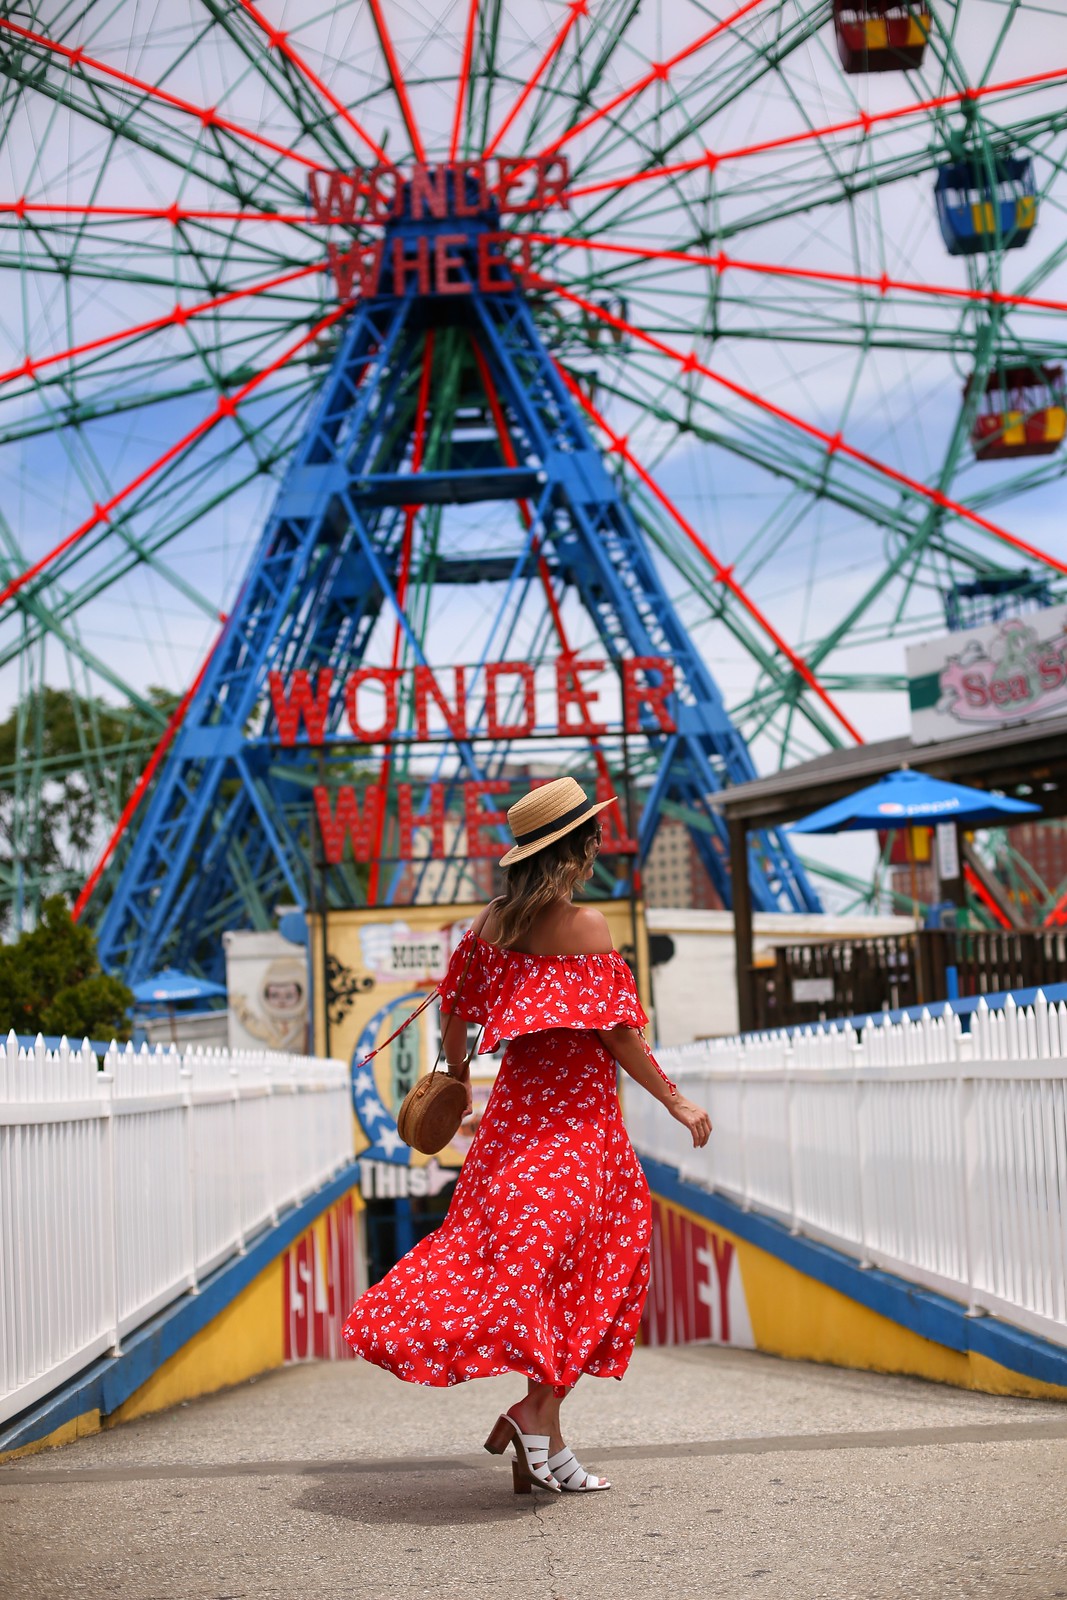 The Most Instagrammable Spots at Coney Island | The Most Instagrammable Places in Coney Island | Best Instagram Photos at Coney Island USA | Wonder Wheel Instagram Photos | Most Instagrammable Places in New York City NYC | Luna Park Pics | Amusement Park Photo Inspiration